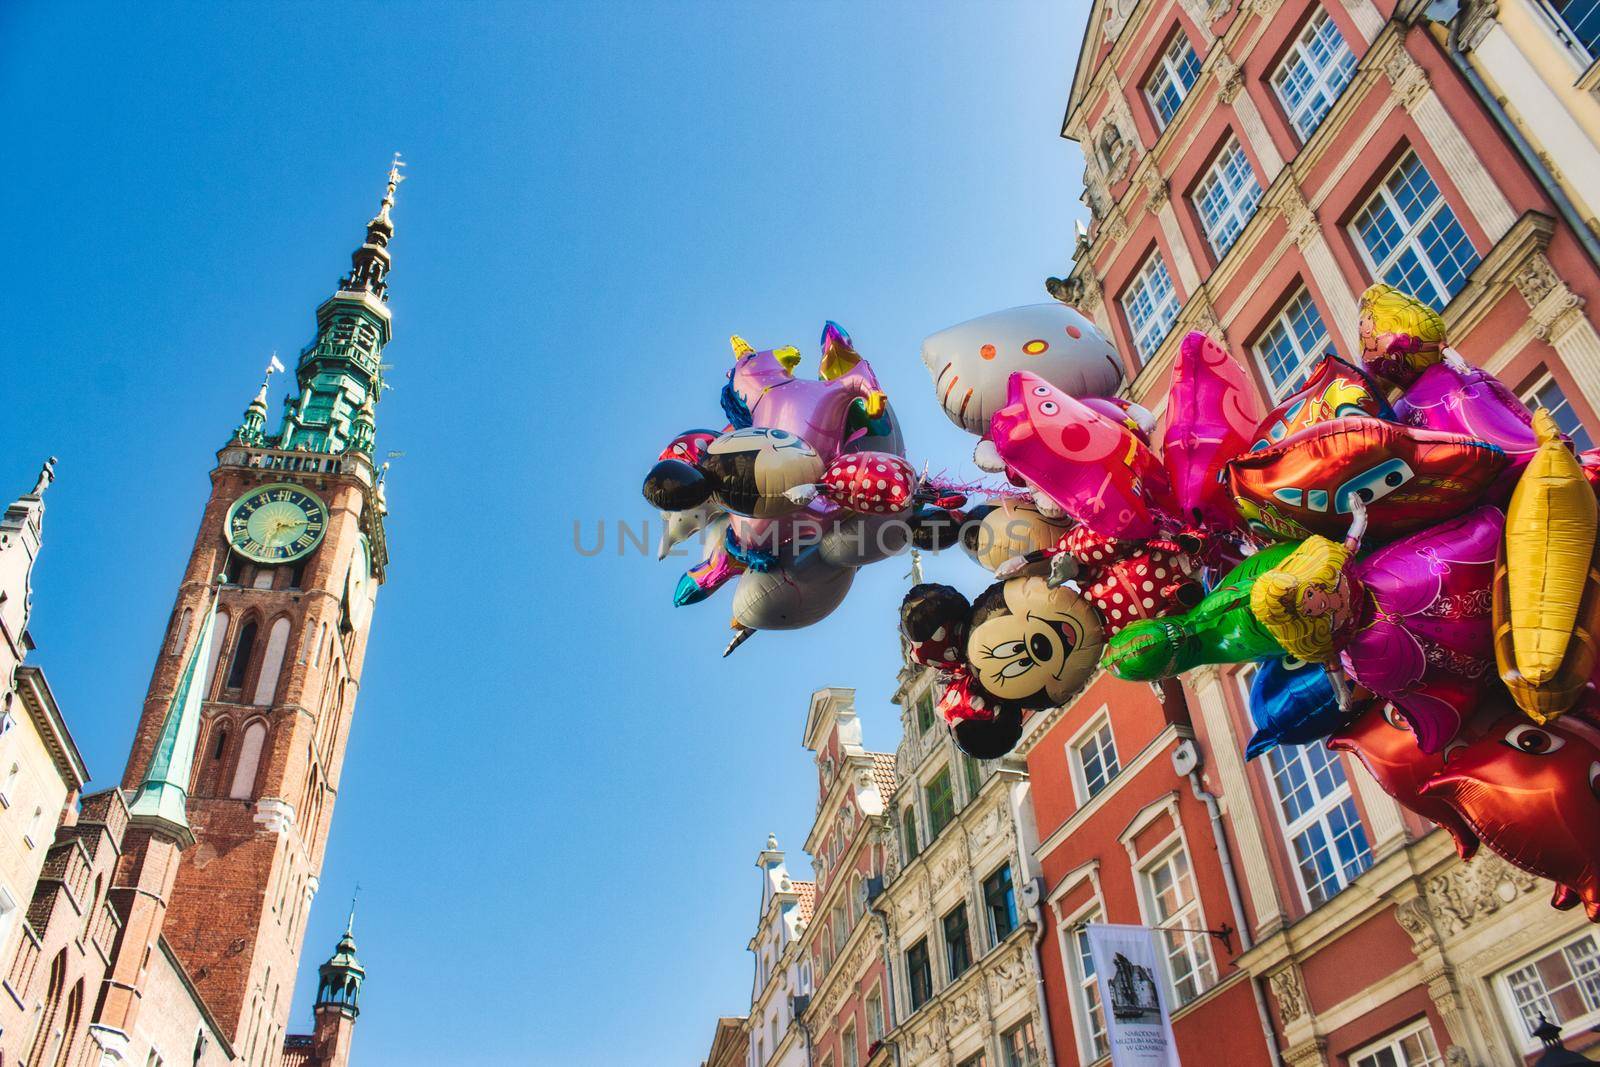 Gdansk / Poland - August 8 2019: Balloons shaped like popular children´s characters being sold in the main square in the city center of Gdansk, Poland